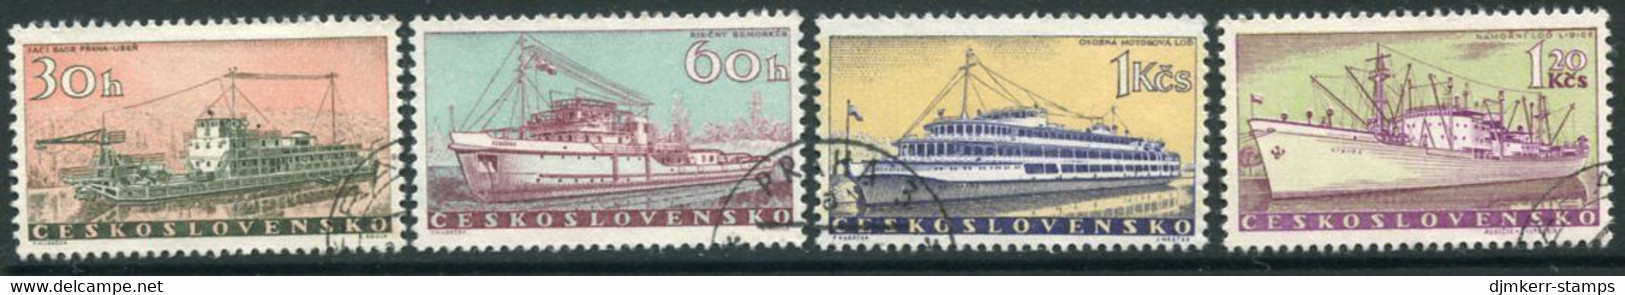 CZECHOSLOVAKIA 1960 Ships Used.  Michel 1179-82 - Used Stamps